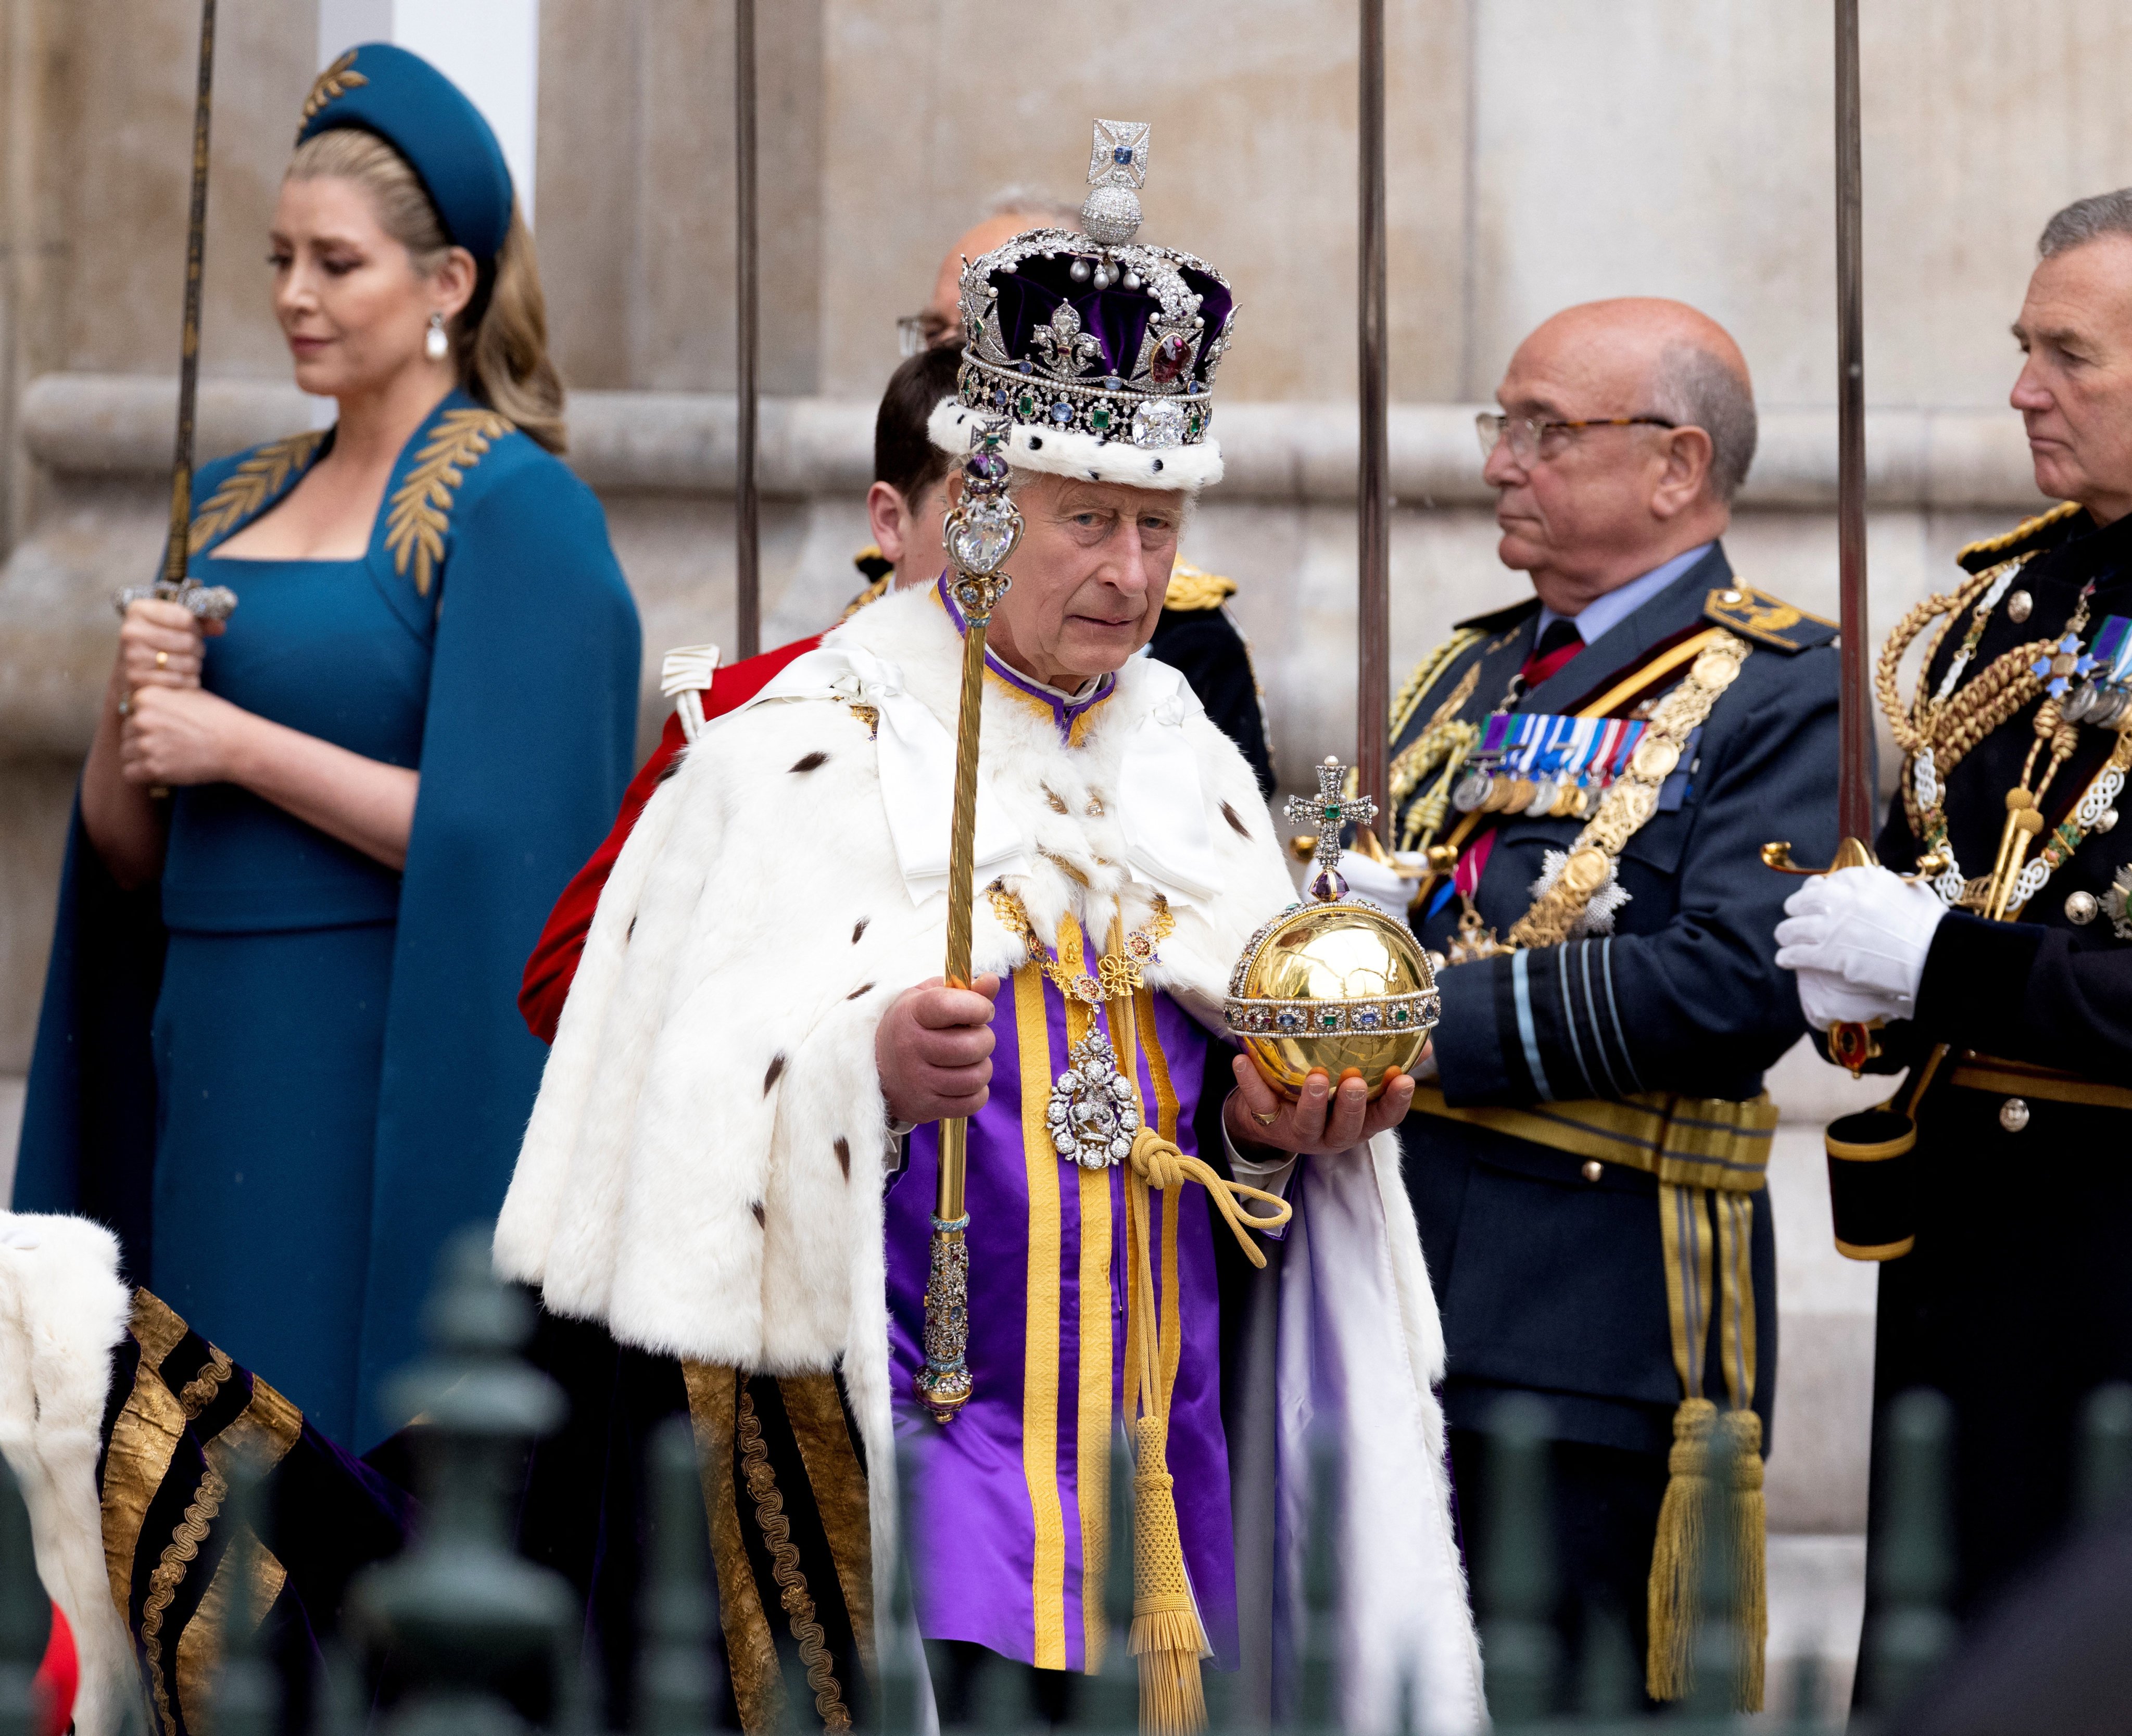 Britain’s King Charles wearing the Imperial State Crown, carrying the Sovereign’s Orb and Sceptre, leaves Westminster Abbey after the Coronation Ceremonies, in London, Britain, on May 6. Photo: Reuters